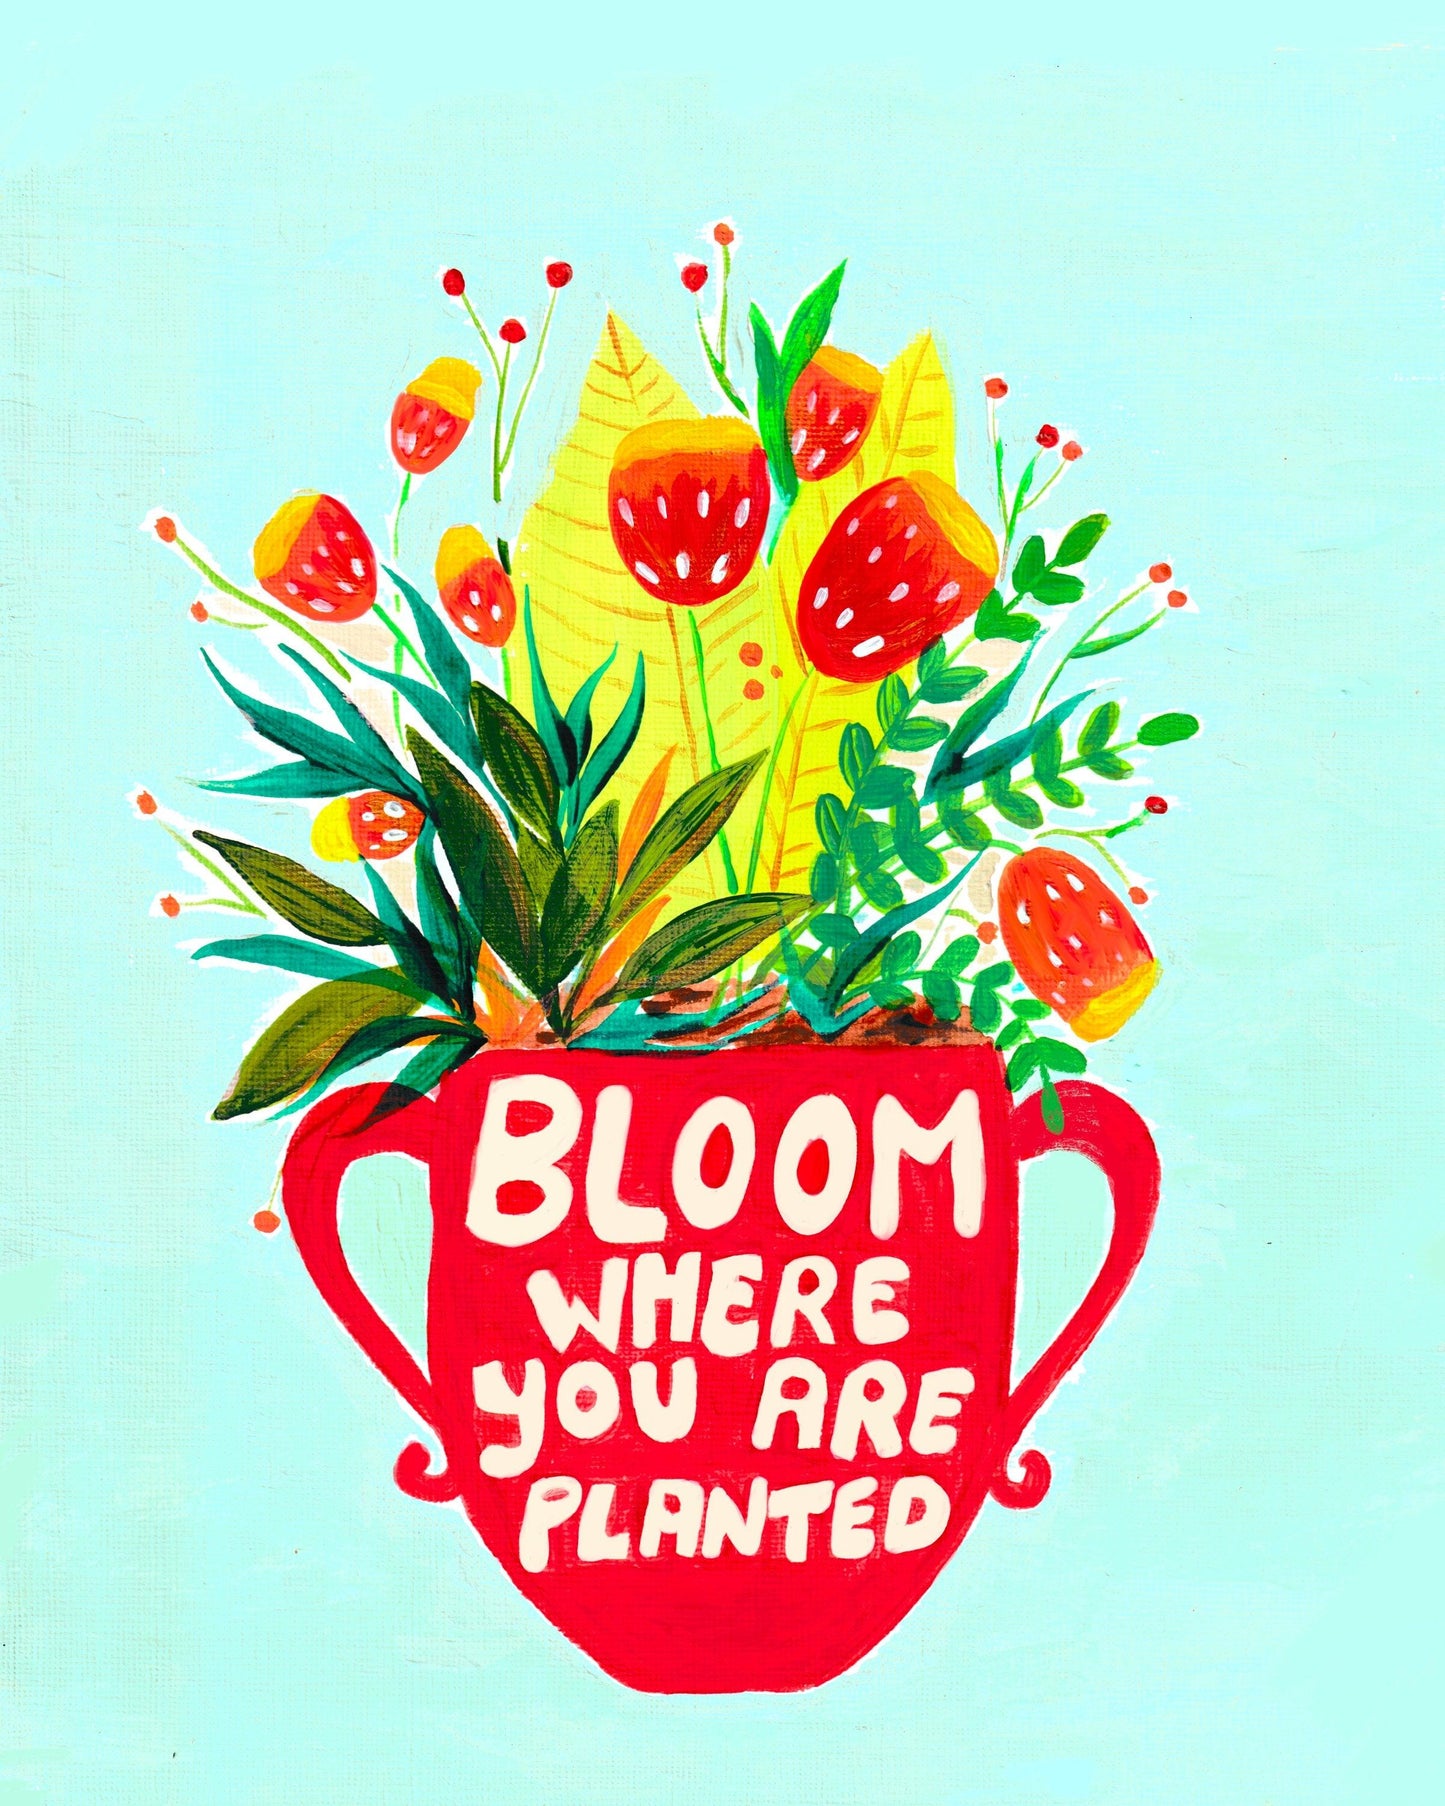 Bloom where you are planted quote - Nabeela Rumi